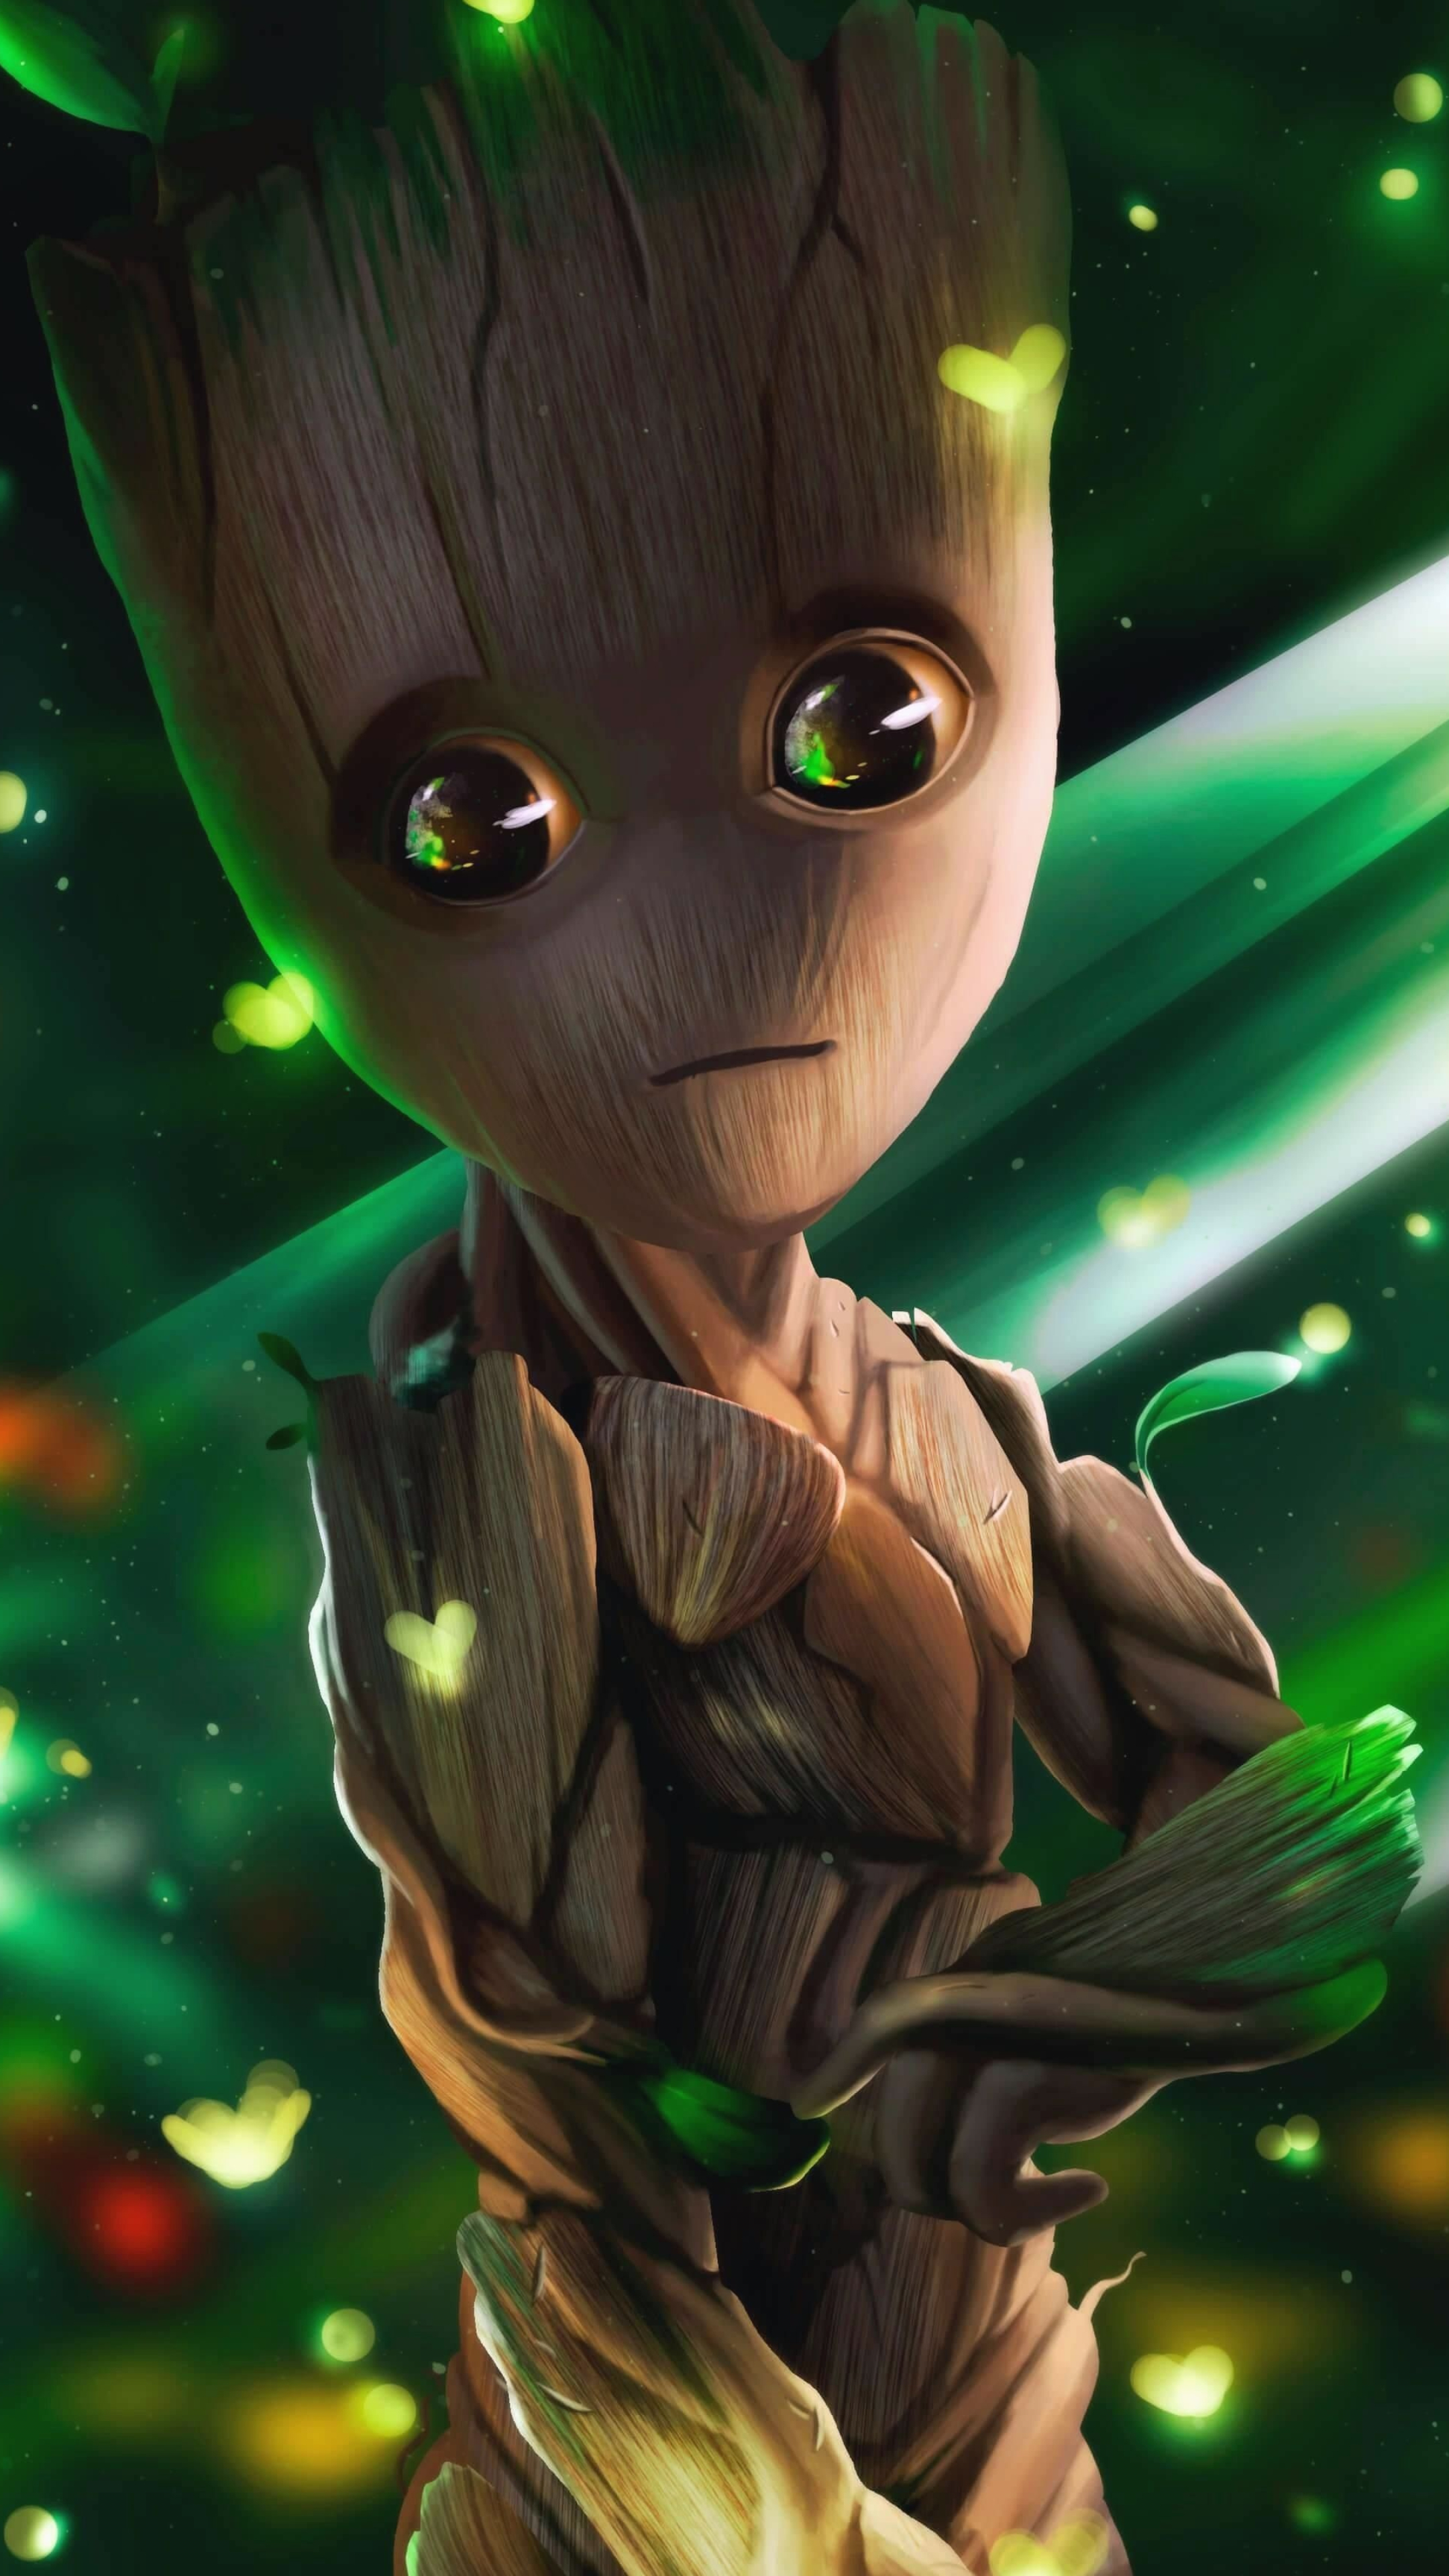 Marvel superhero, Baby Groot, Adorable character, Guardians of the Galaxy, 2160x3840 4K Handy